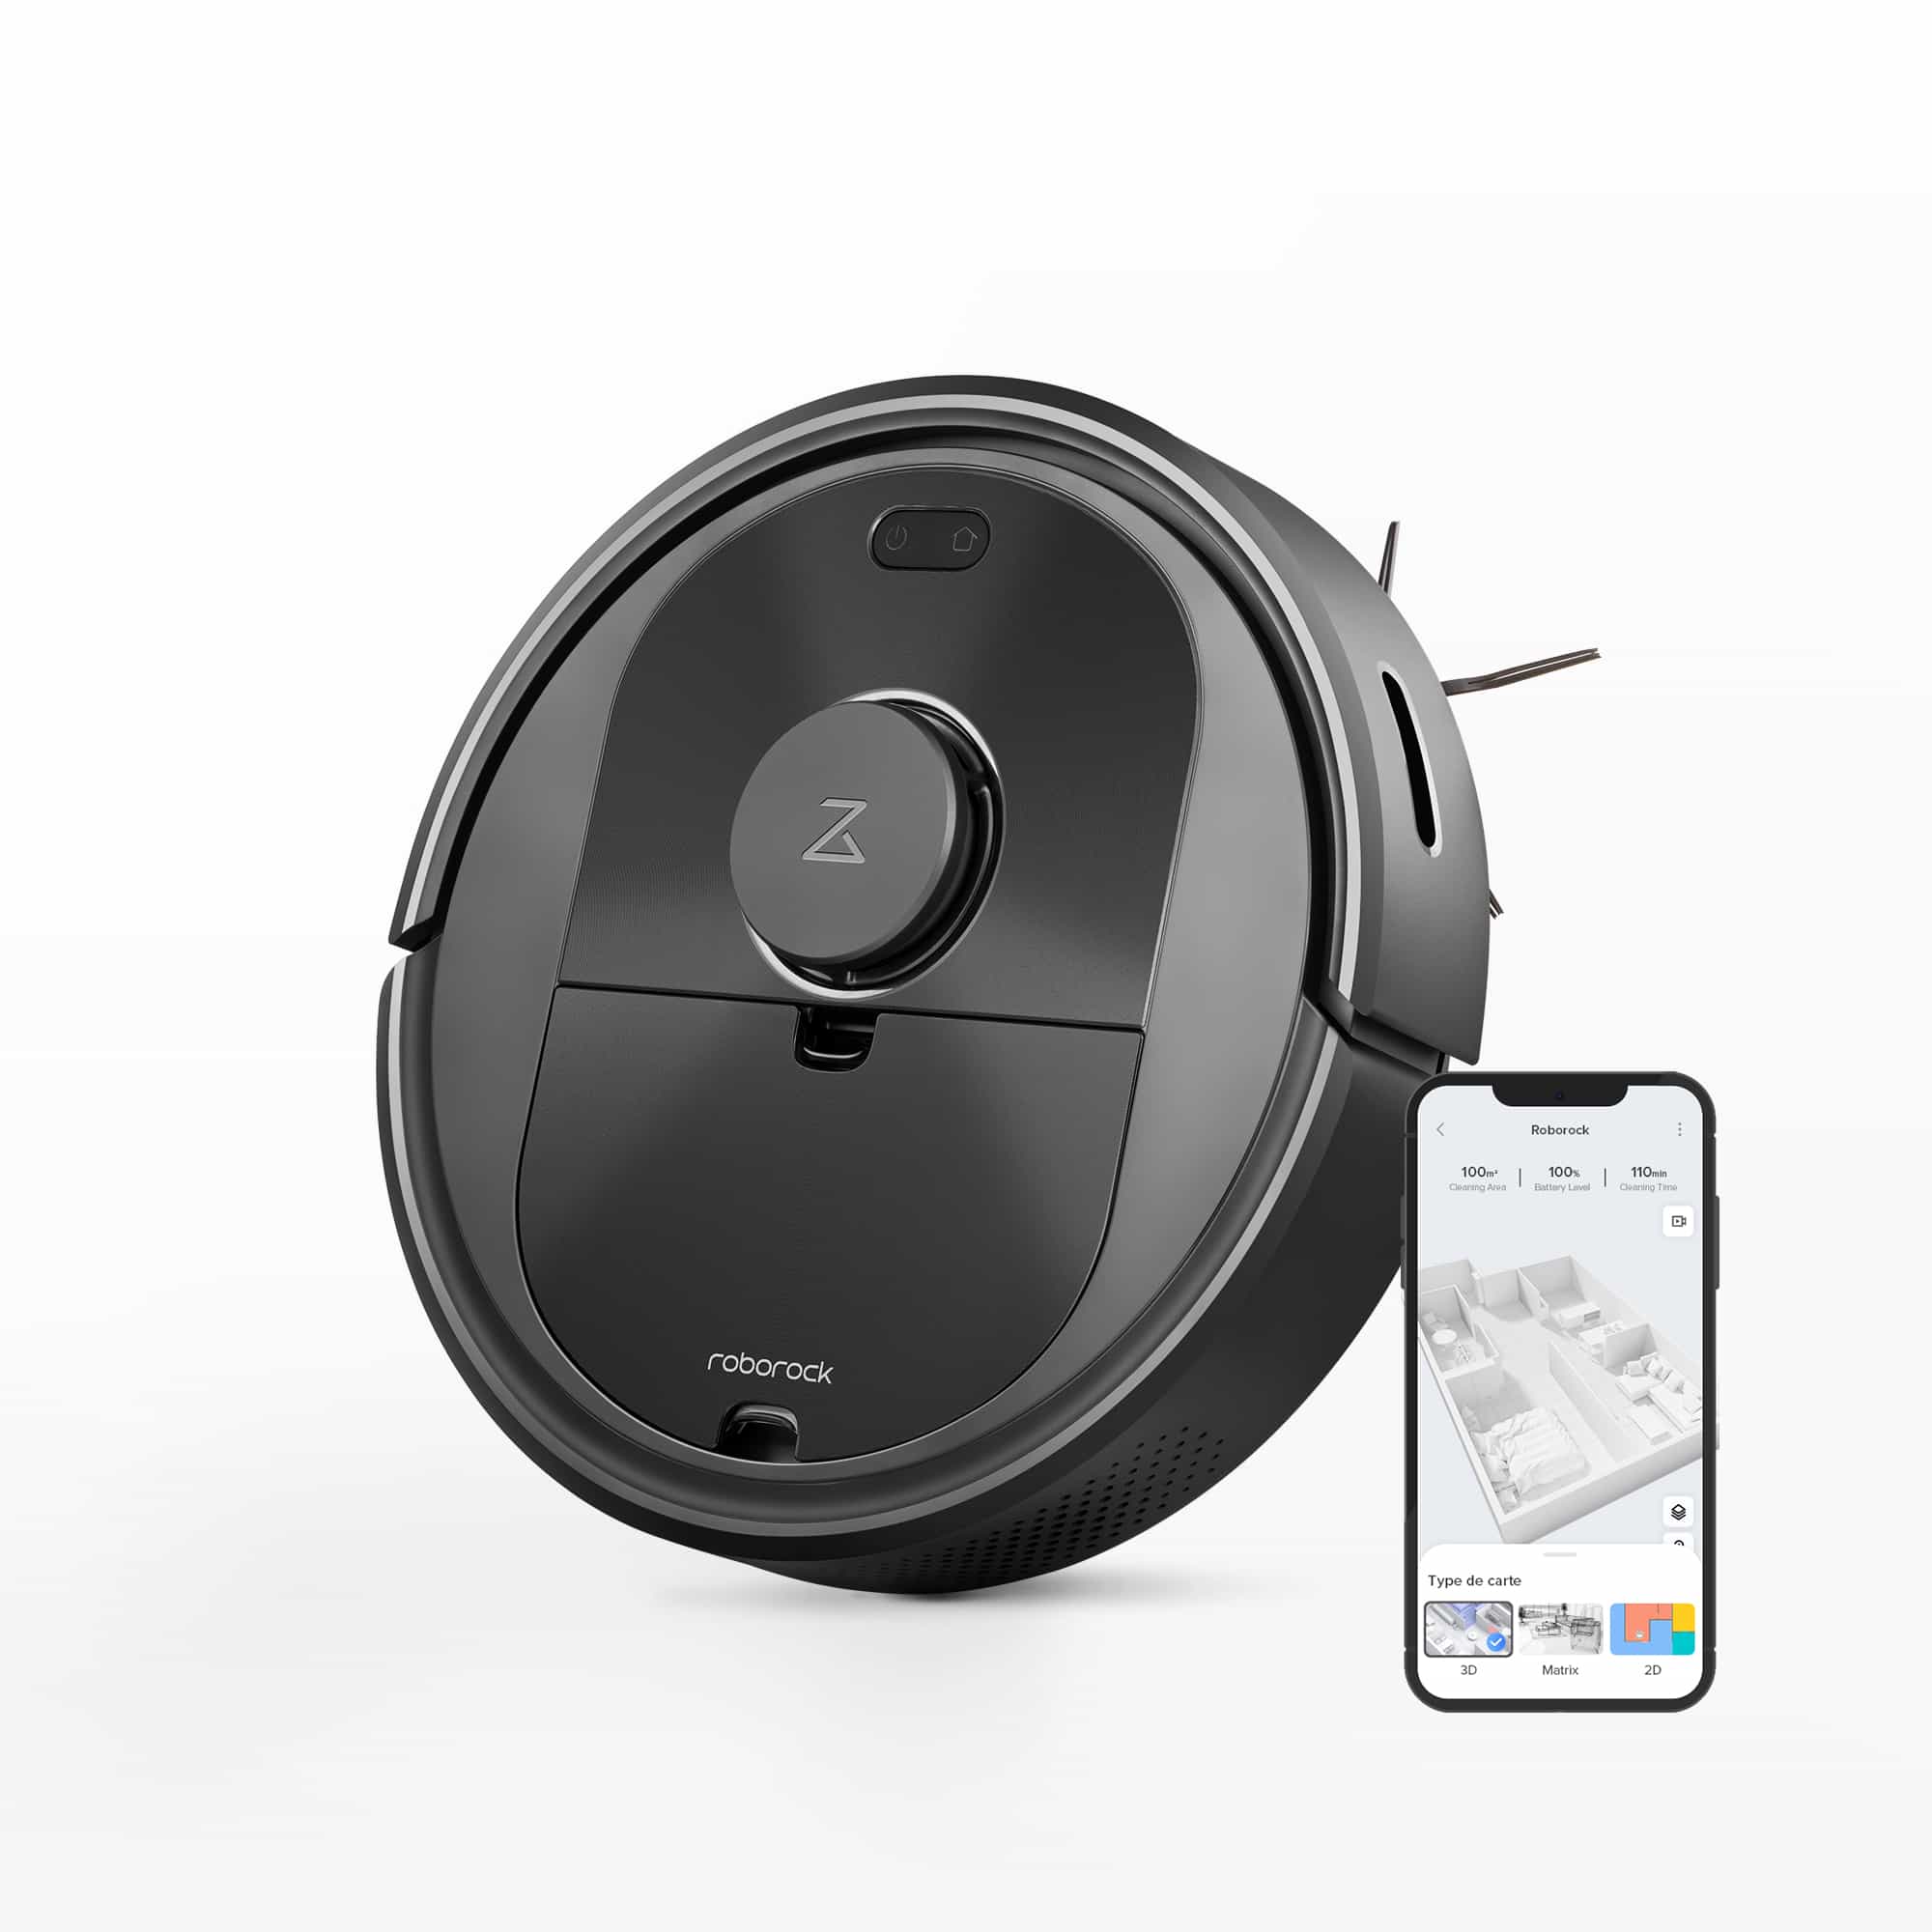 Roborock Q5 Robotic Vacuum Cleaner with Strong 2700Pa Suction Lidar Navigation Multi-Level Mapping No-Go Zones App Control